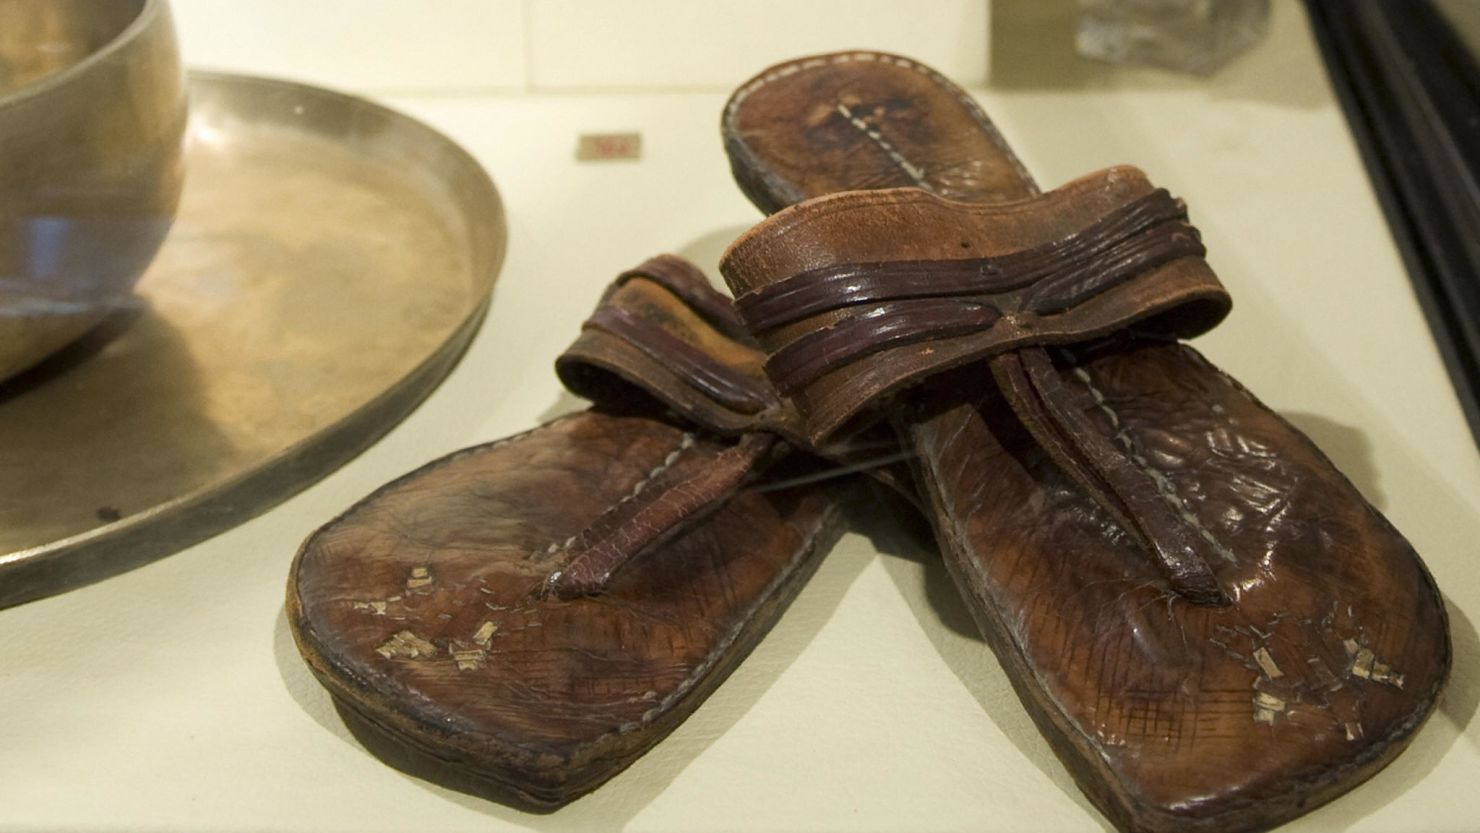 Mahatma Gandhi's famous sandals and other memorabilia pictured here on display in 2009 in New York. 